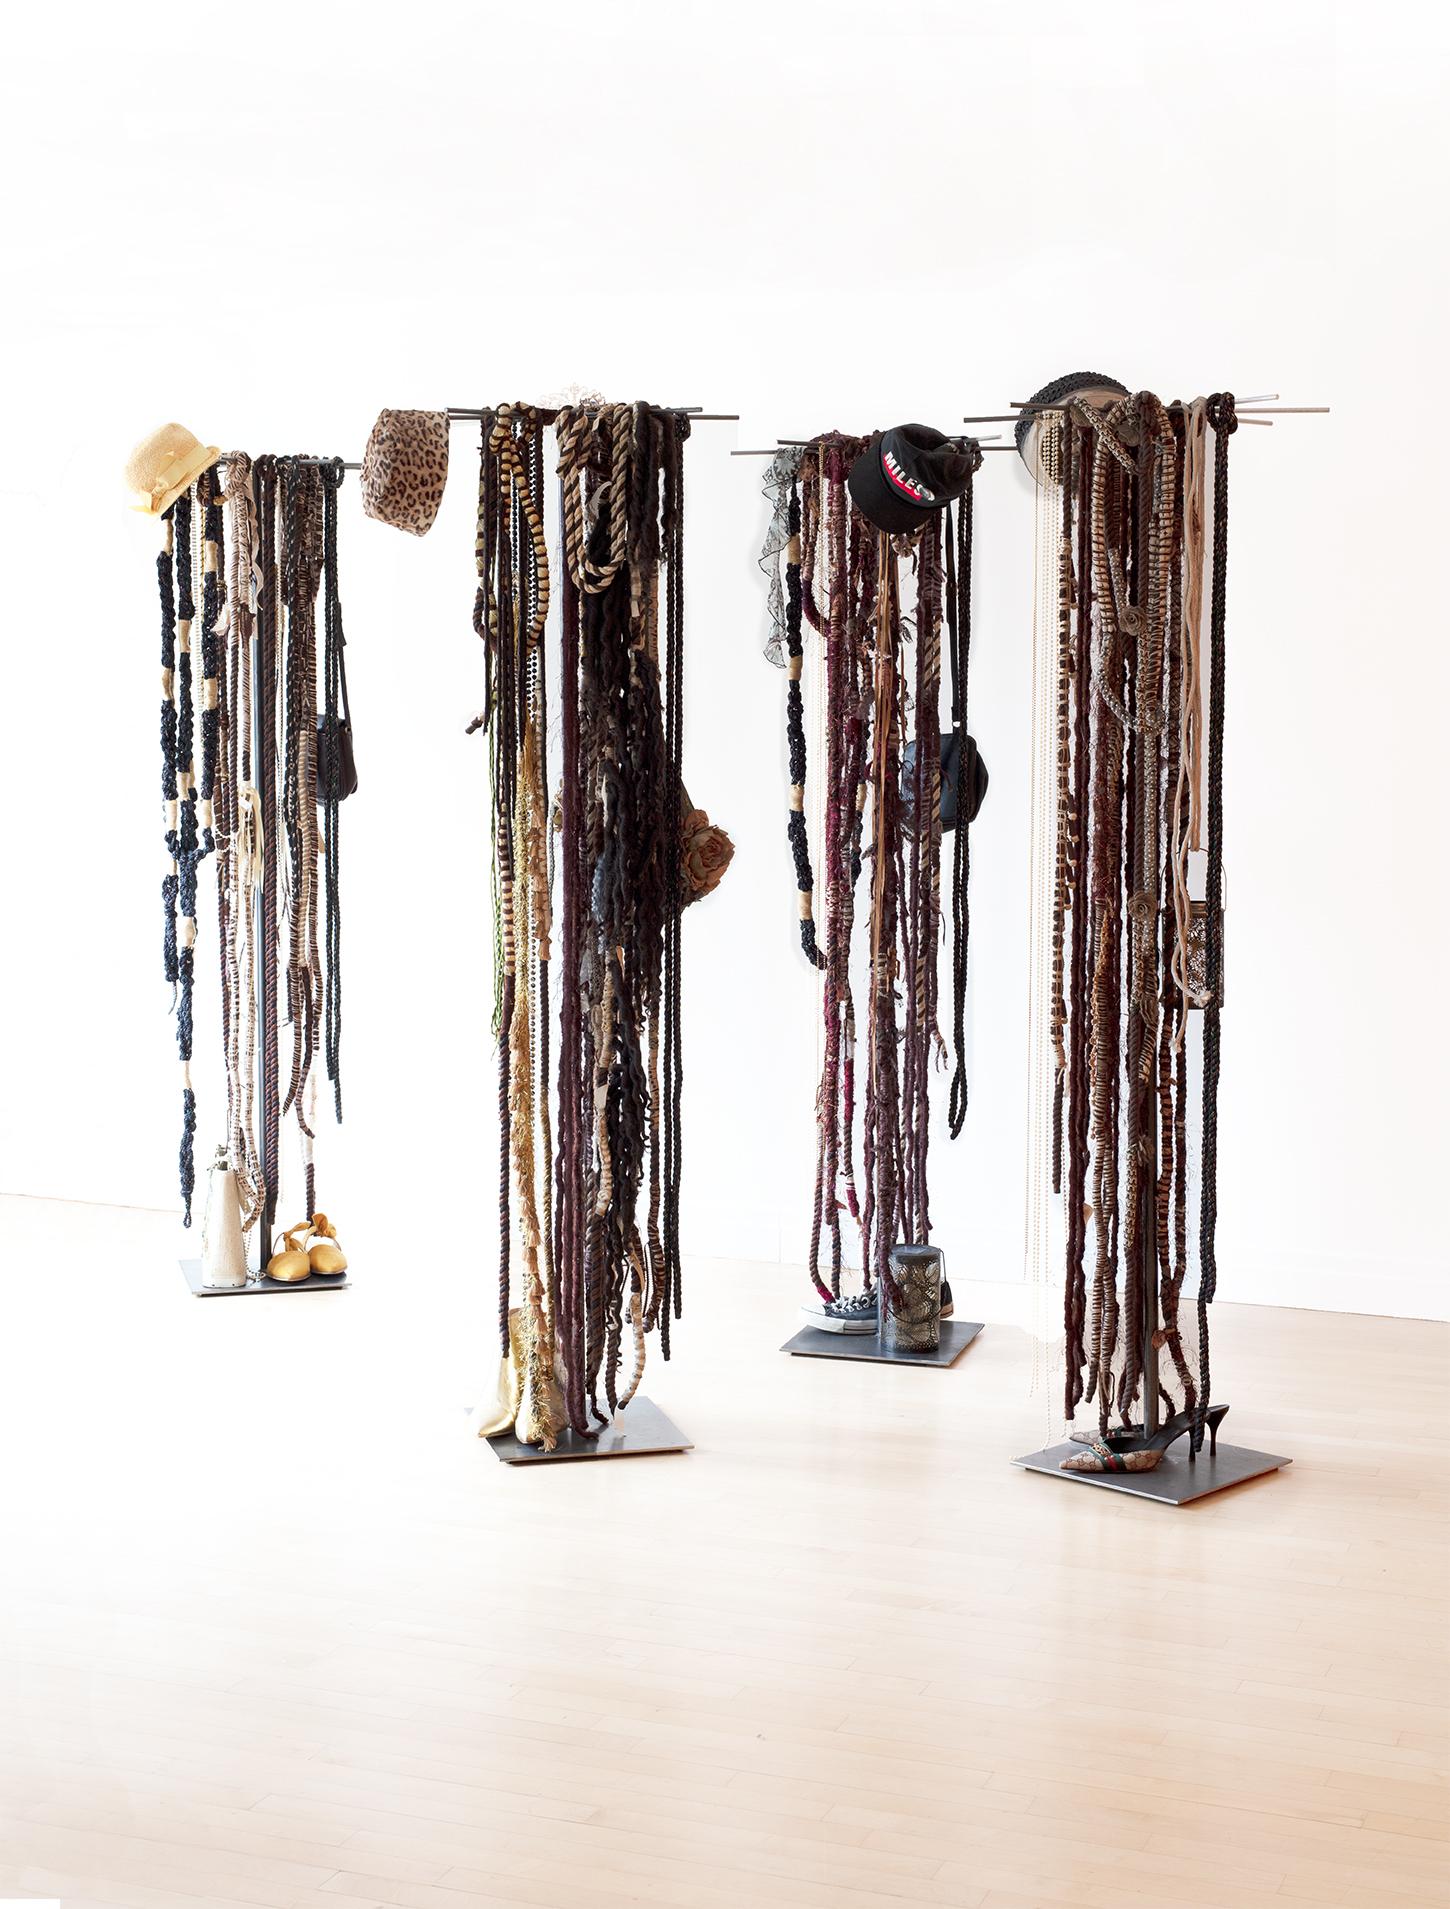 Theda Sandiford Abstract Sculpture - Large Textile Conceptual Sculptures: 'All Dressed Up and Nowhere to Go'